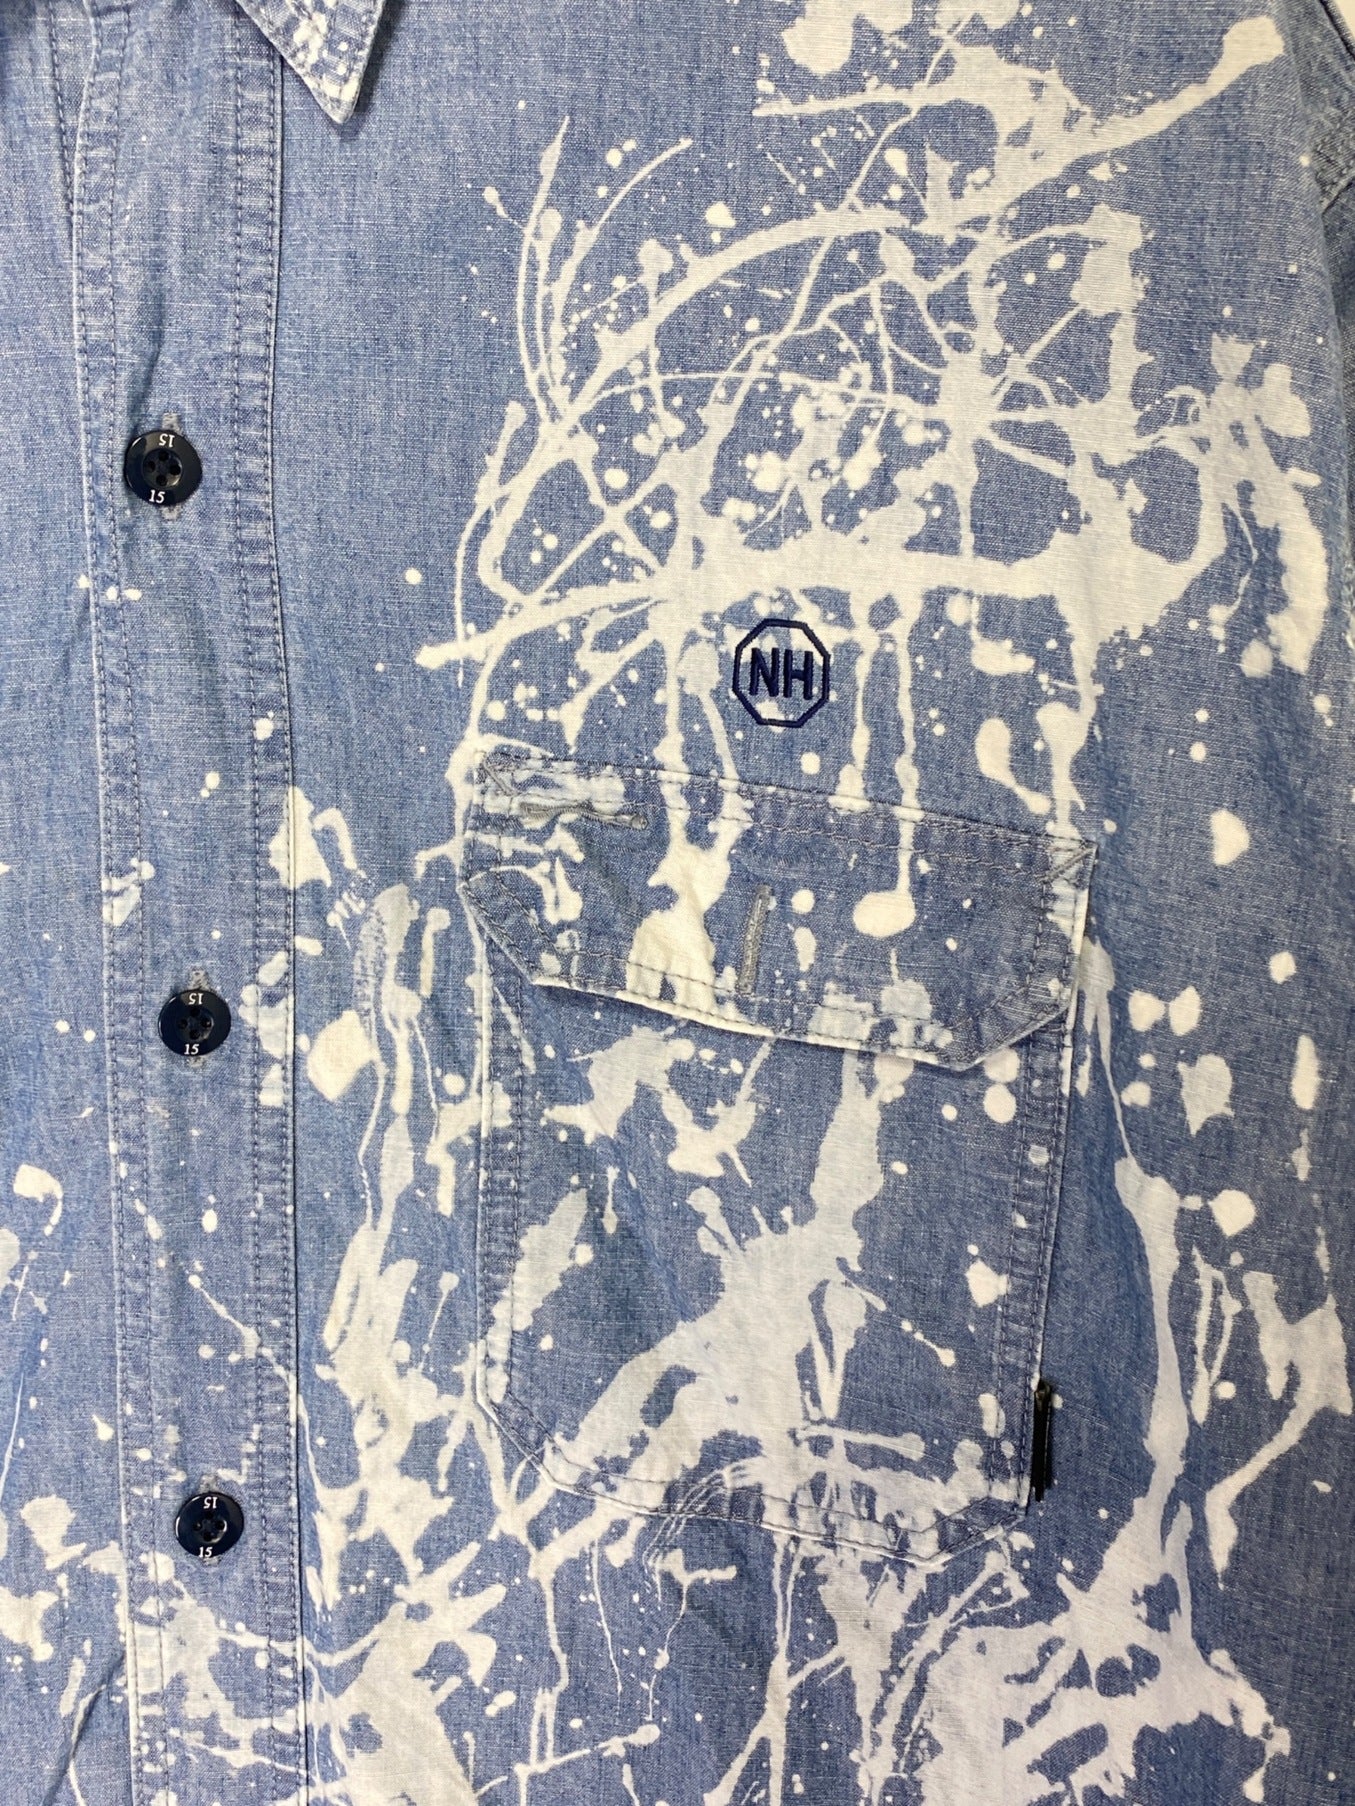 [Pre-owned] NEIGHBORHOOD BLEACH CHAMBRAY SH LS . CO 22AW Fall/Winter